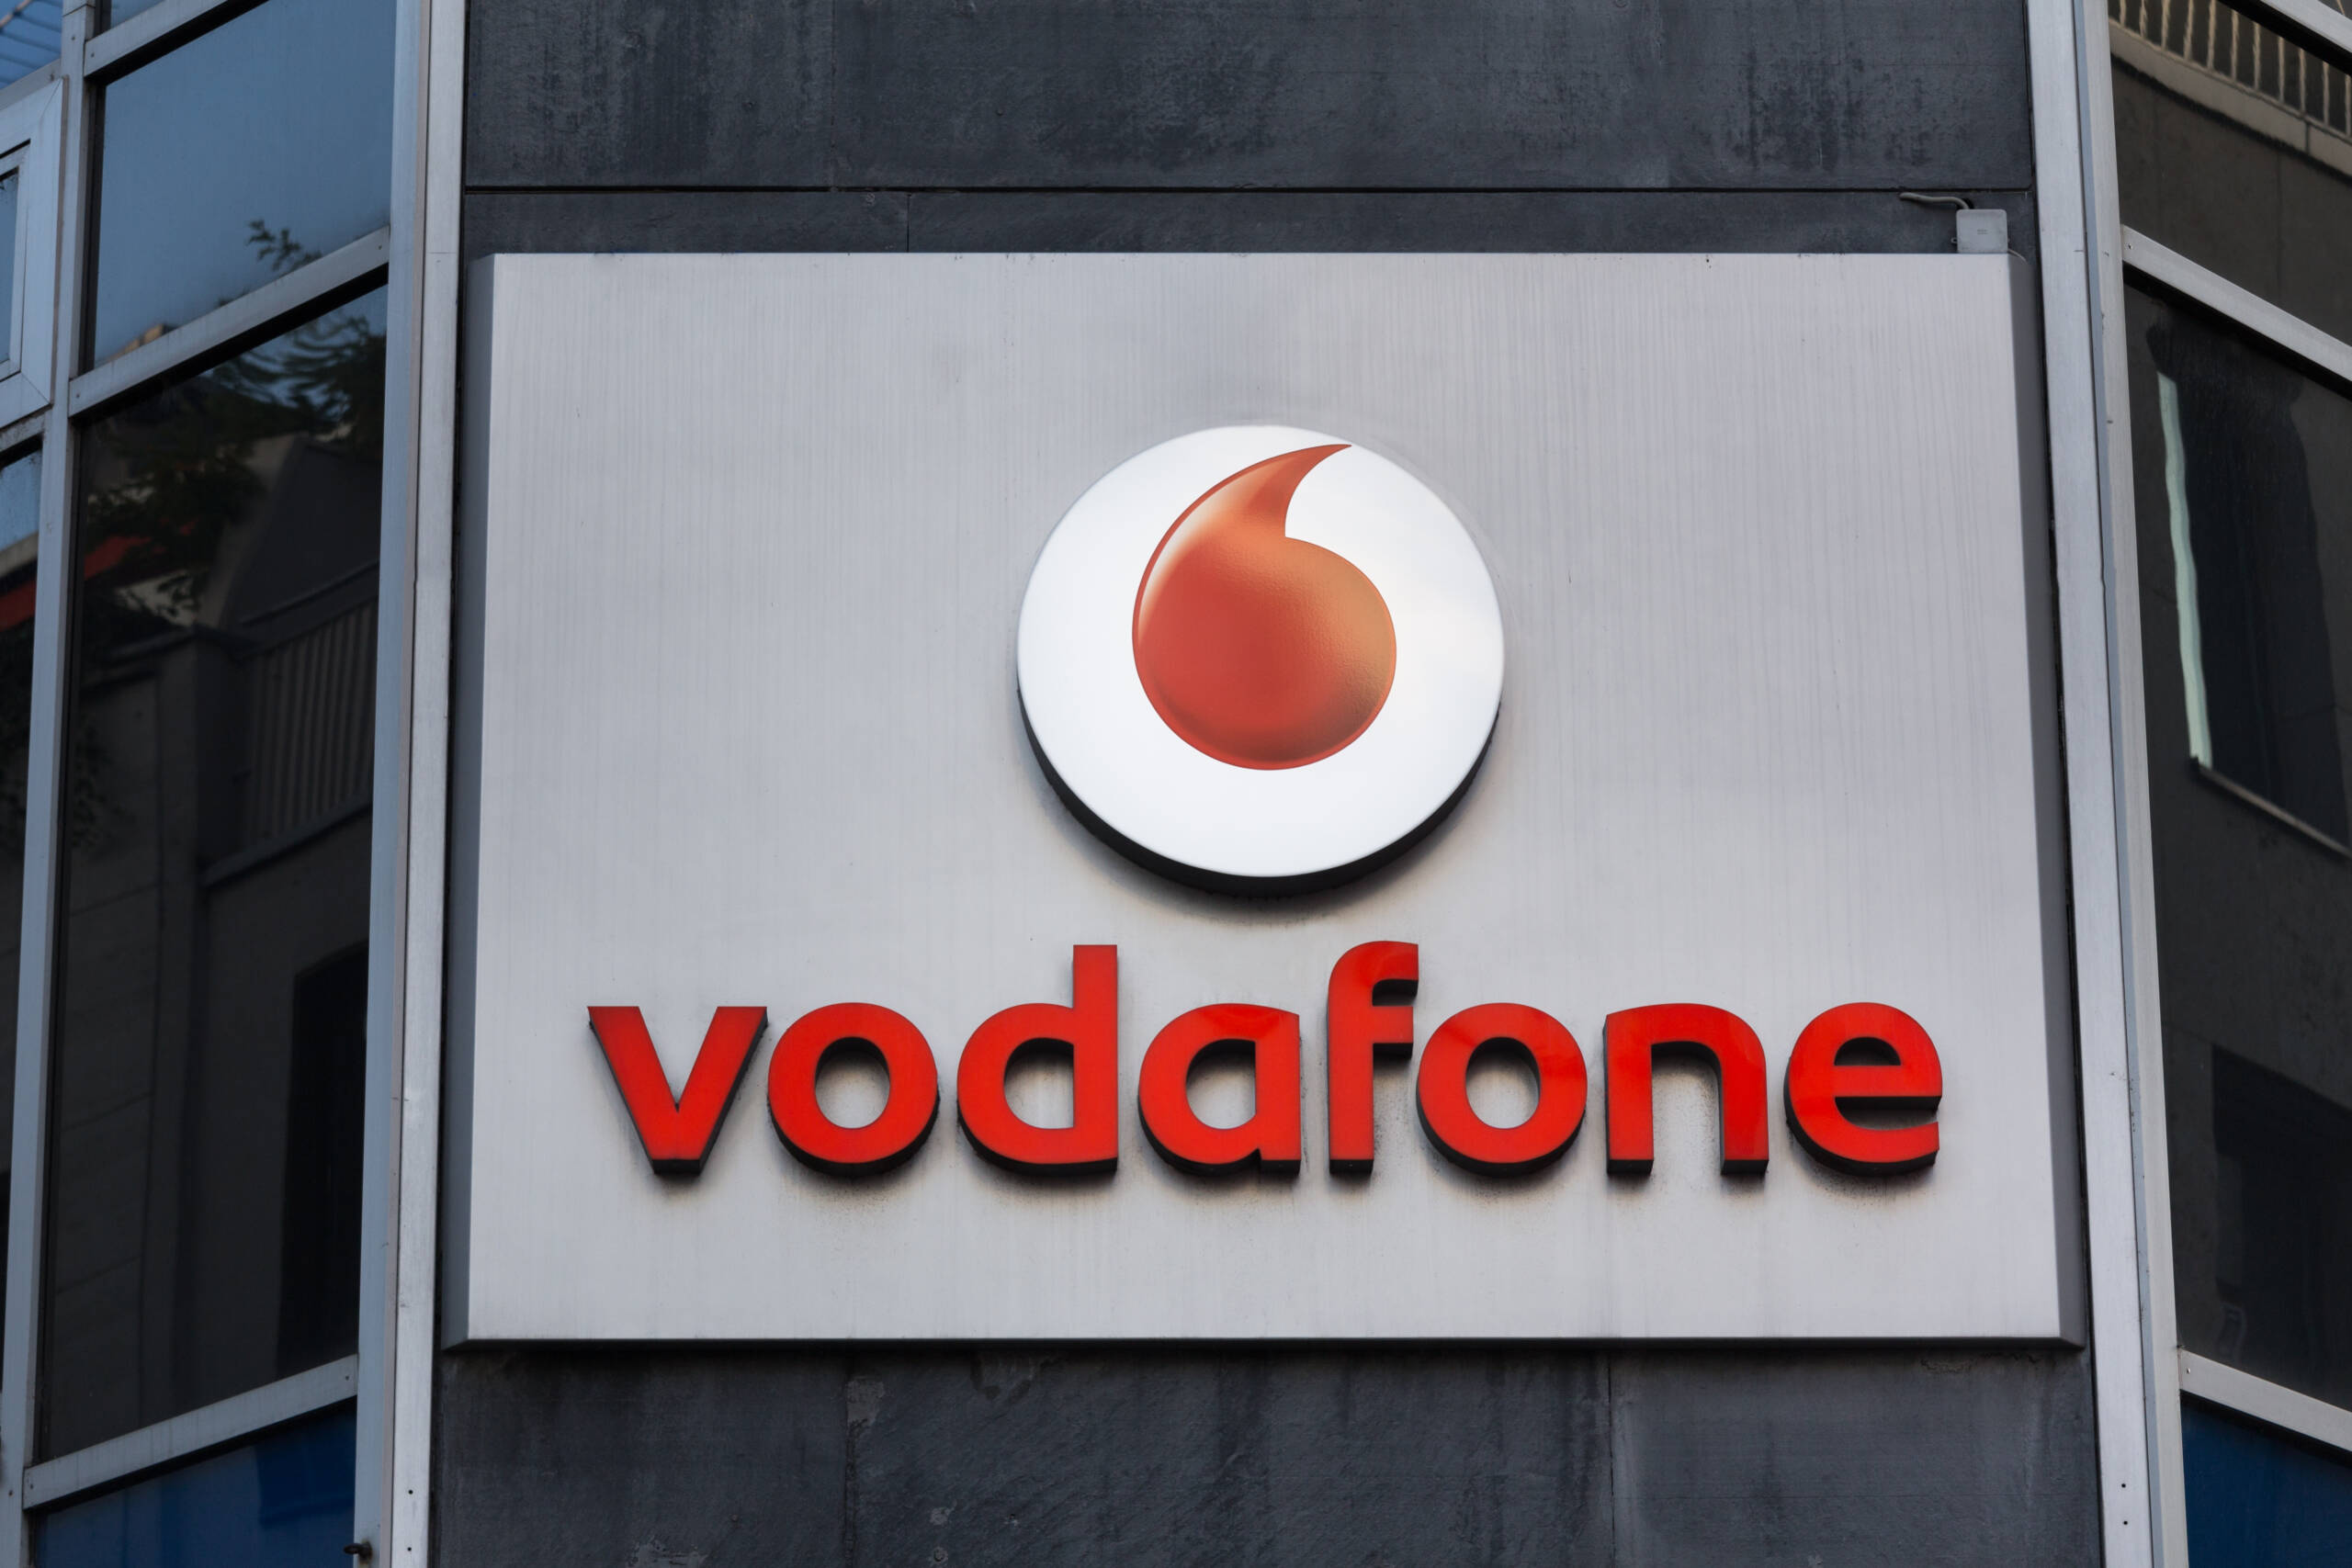 vodafone has an nft collection coming